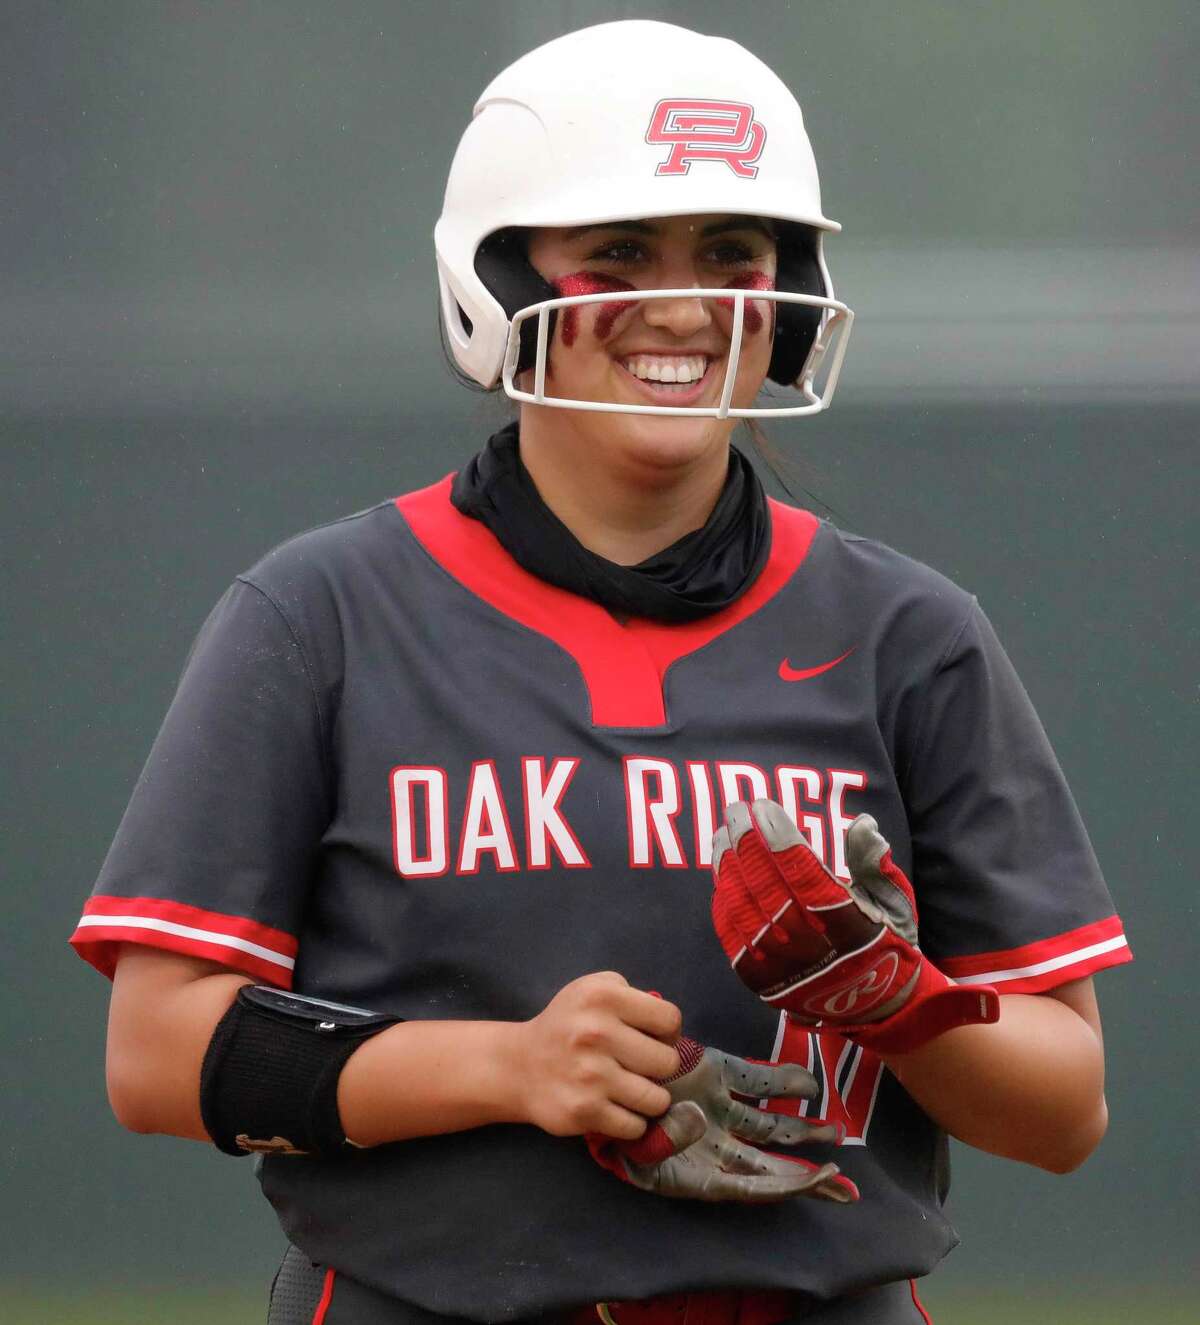 Isabella Mazur (10) of Oak Ridge smiles after hitting a single during the fifth inning of a District 13-6A high school softball game at Willis High School, Friday, April 16, 2021, in Willis.